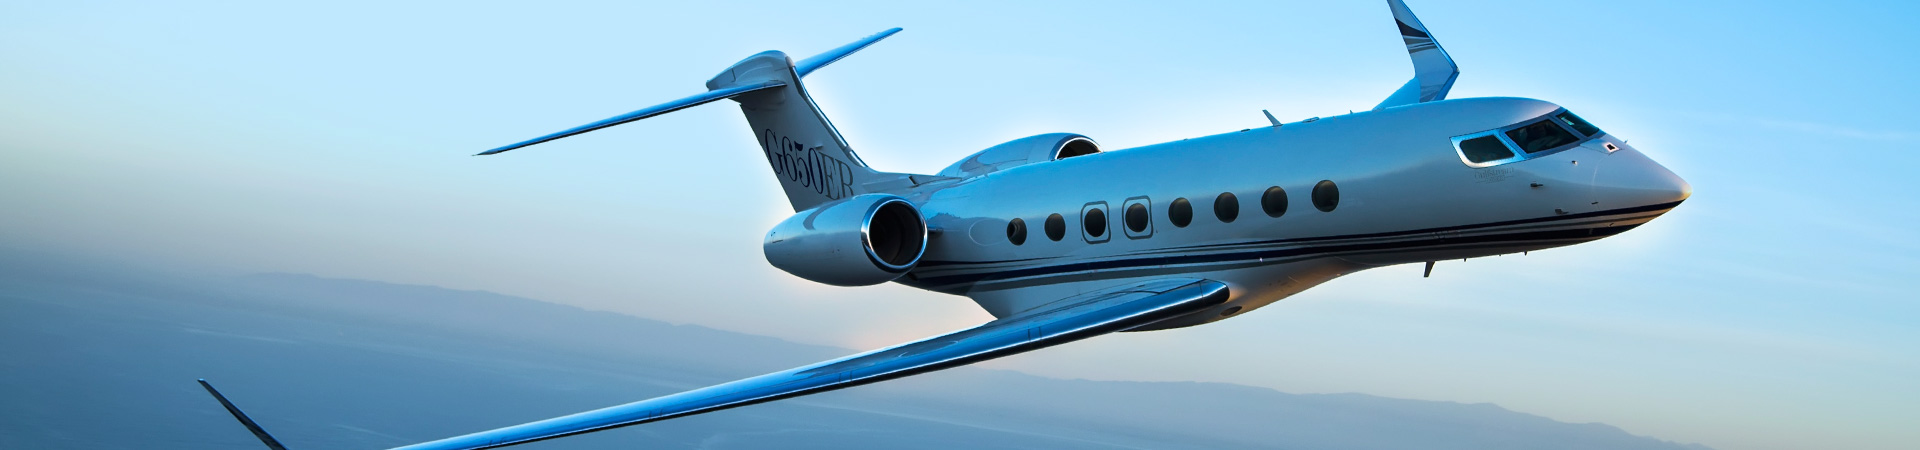 Starr Luxury Jets Long Range Private Jet Aircraft Hire